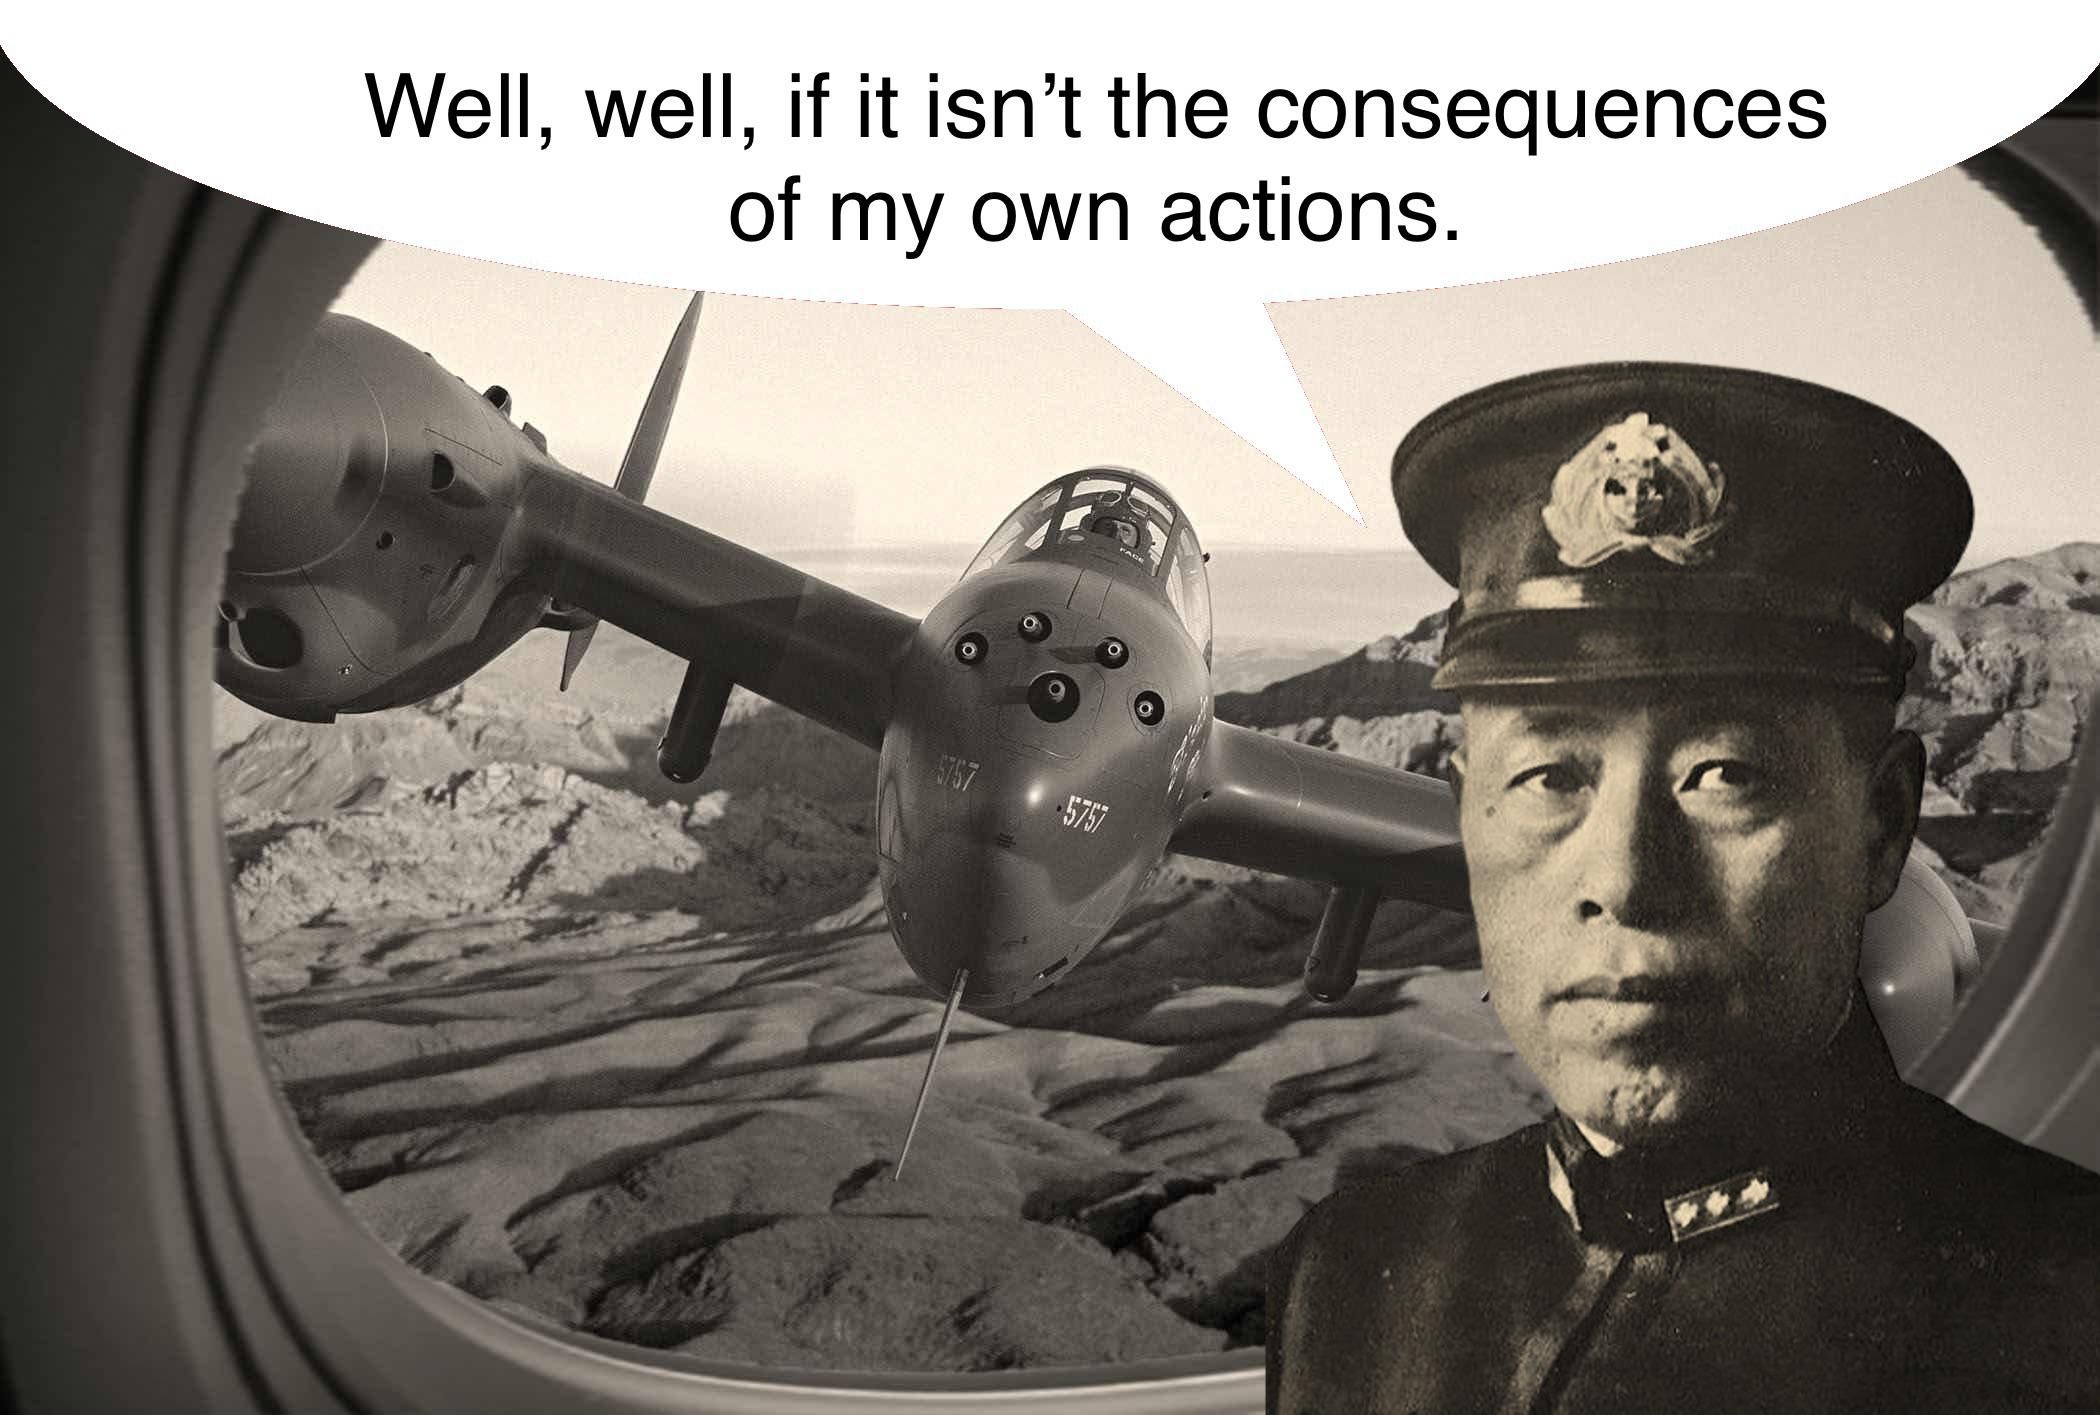 80 years ago today, Admiral Yamamoto found out